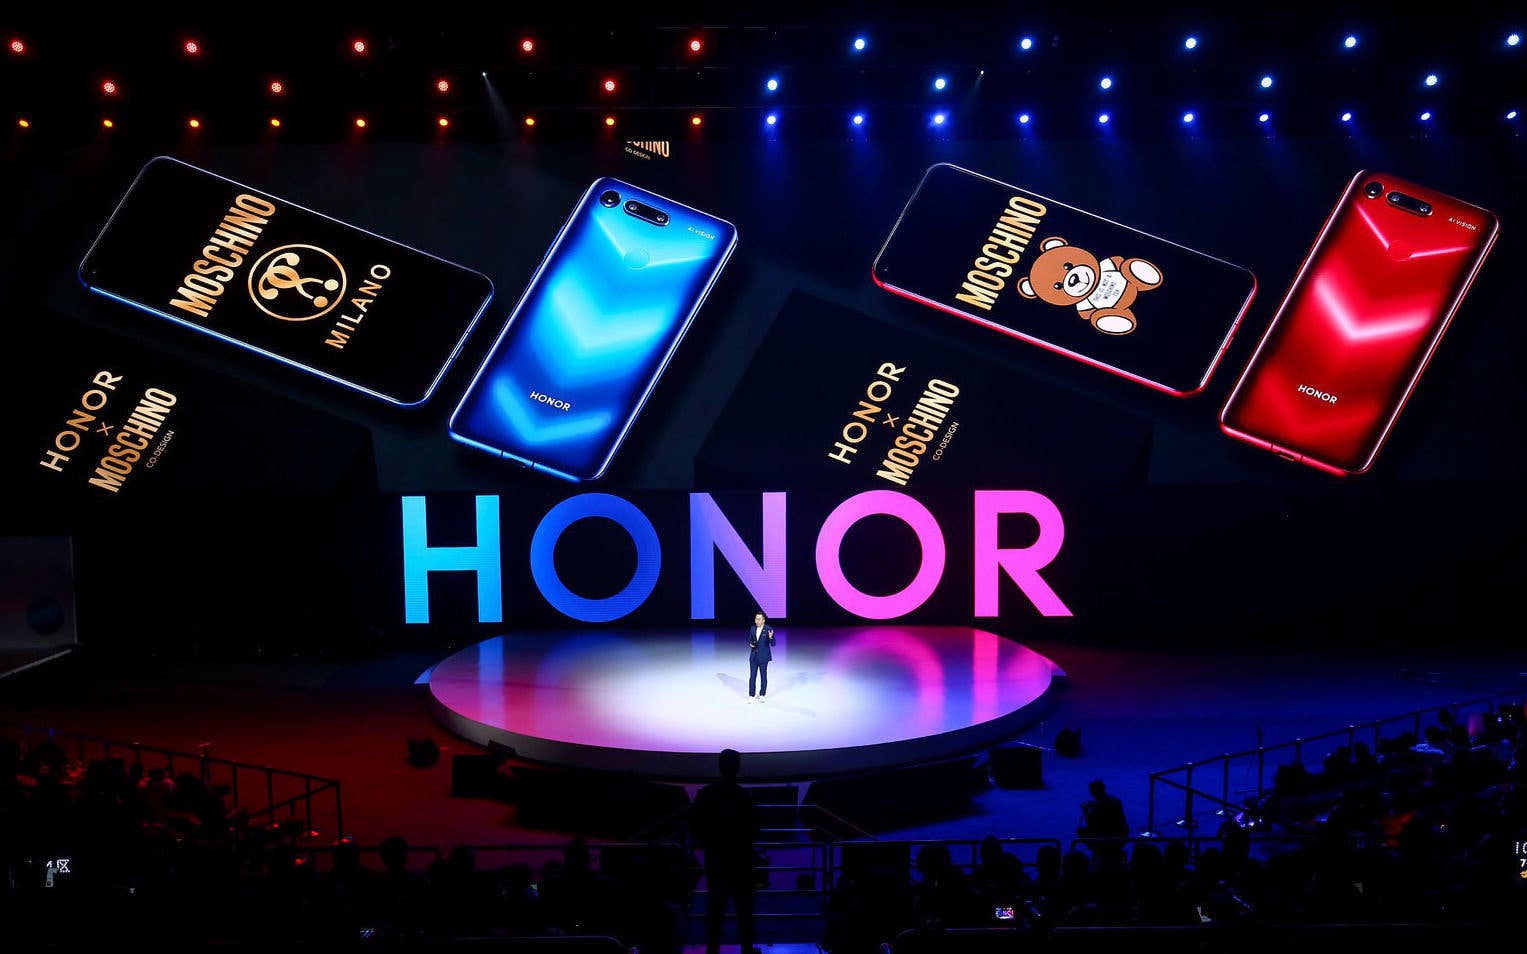 honor view 20 Moschino edition